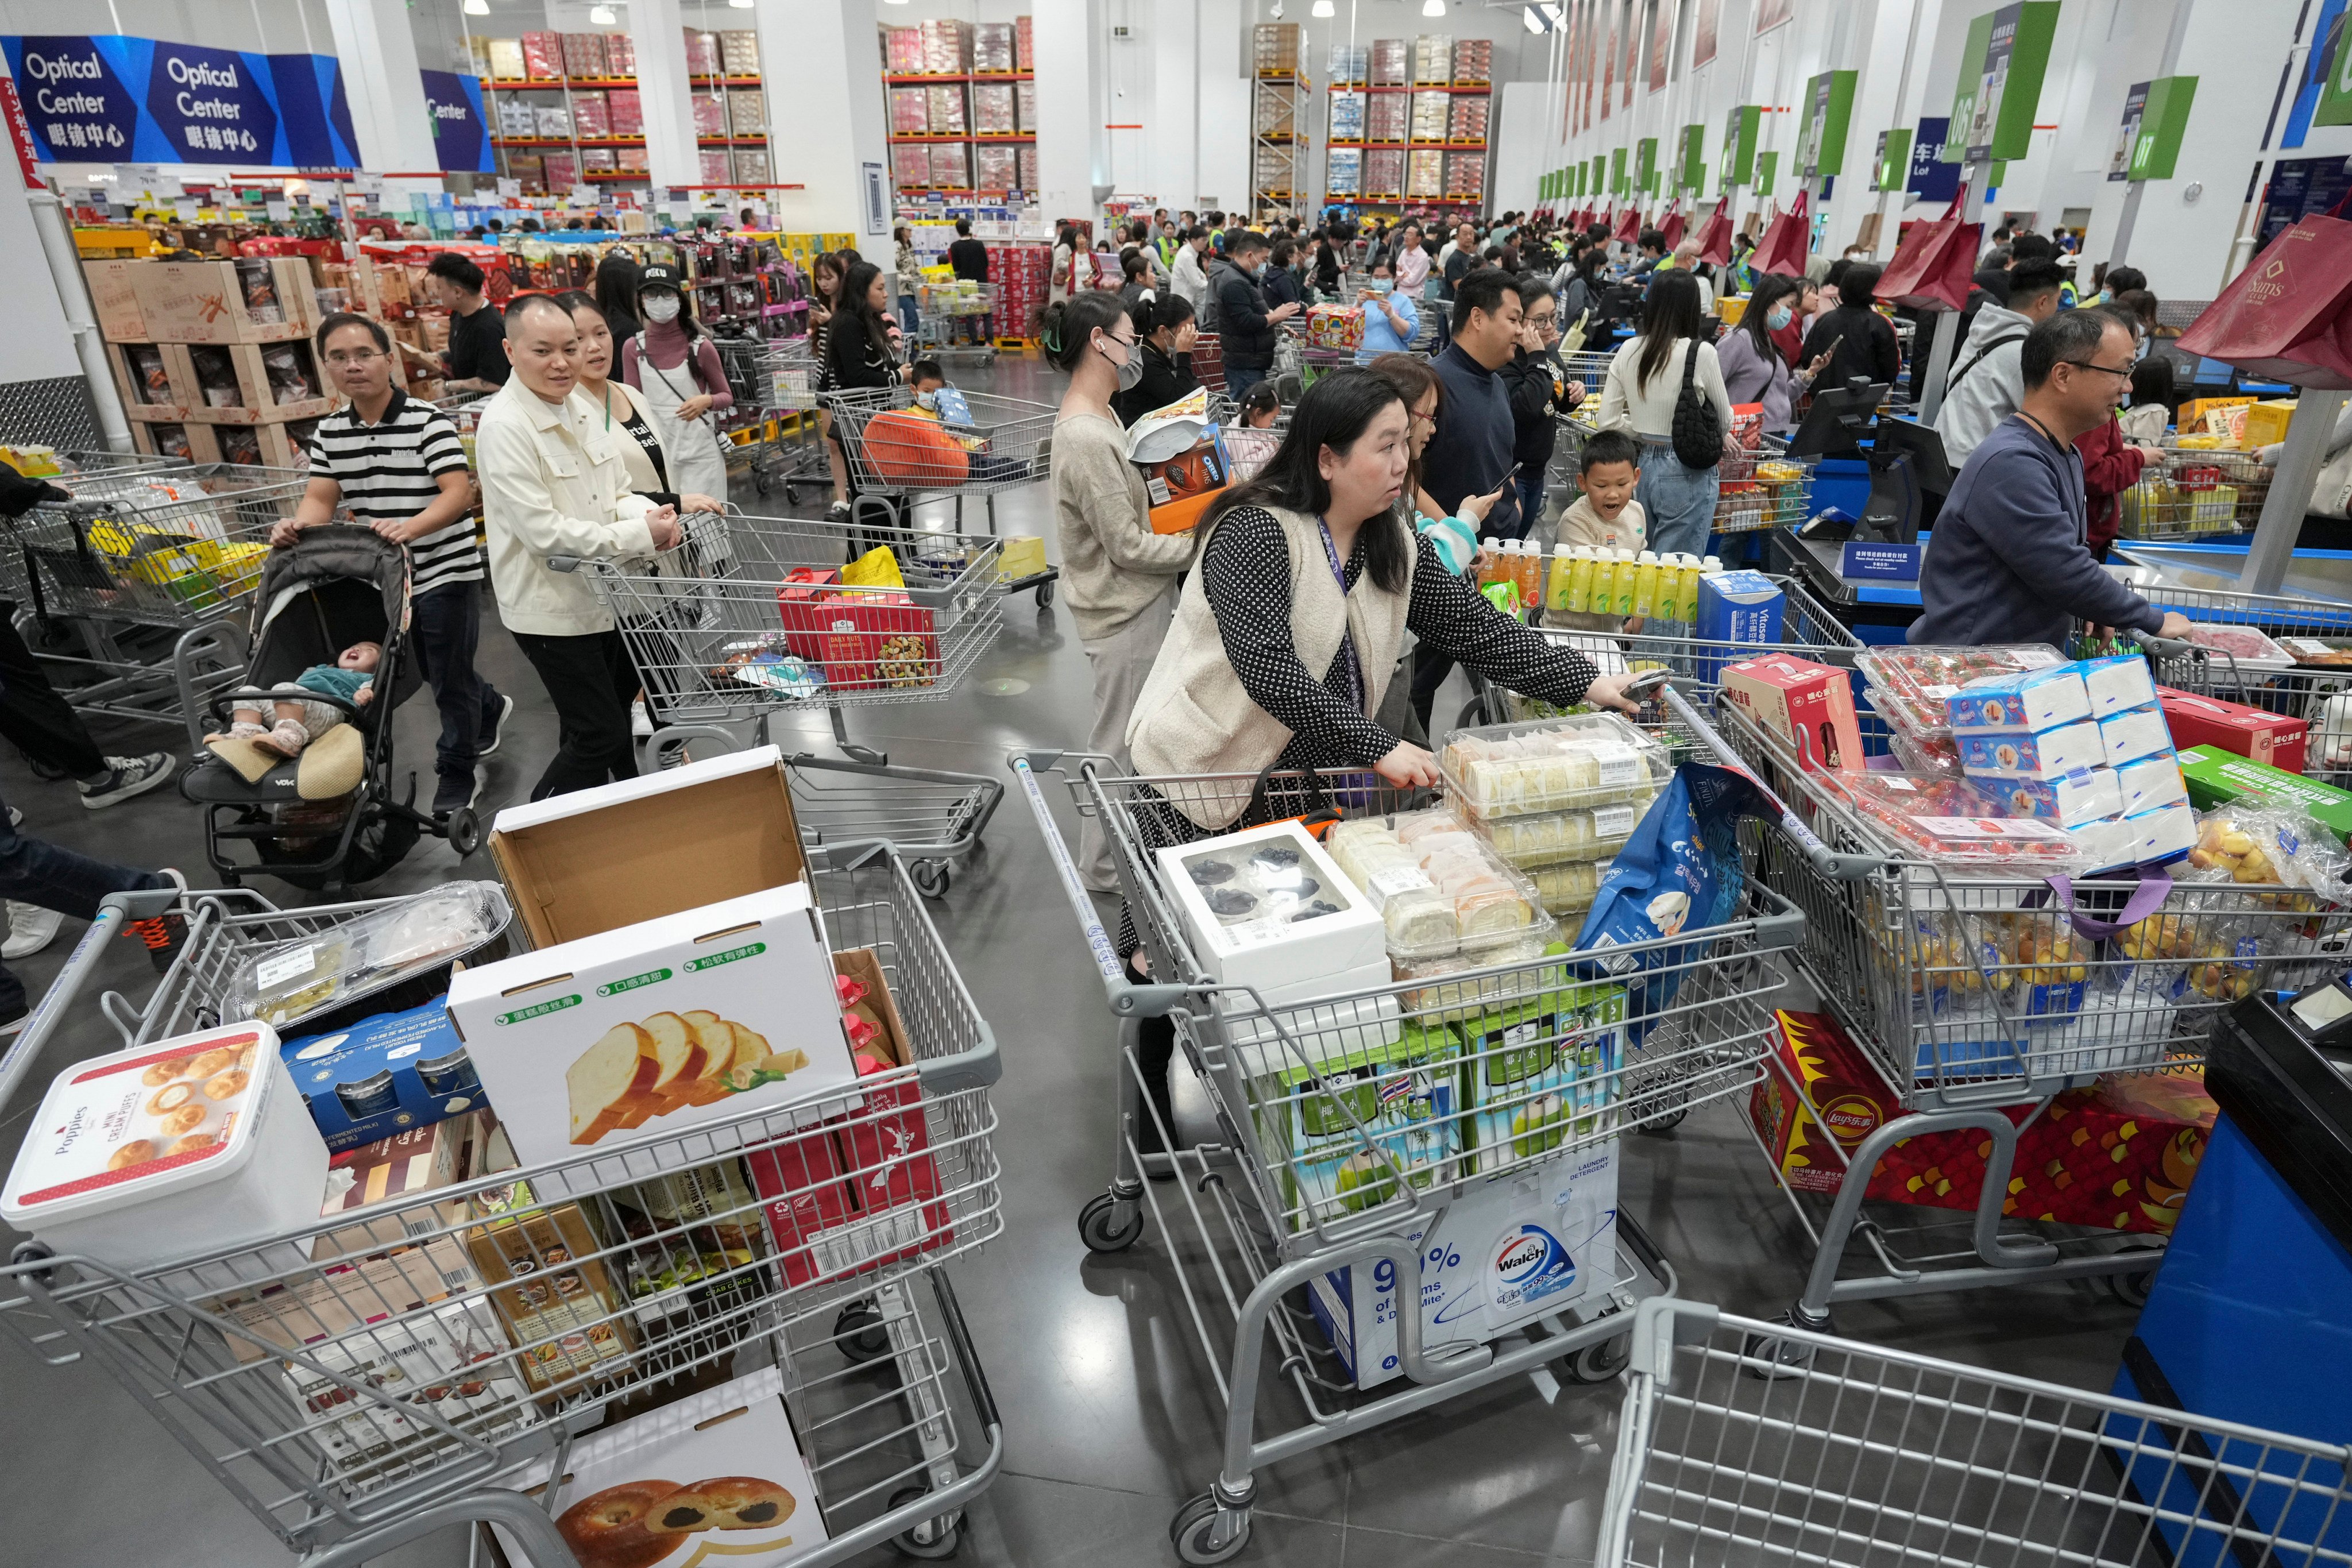 Shoppers line up to check out items at a Sam’s Club in Qianhai, Shenzhen. The US retailer is planning to launch online shopping in Hong Kong, sources have said. Photo: Eugene Lee